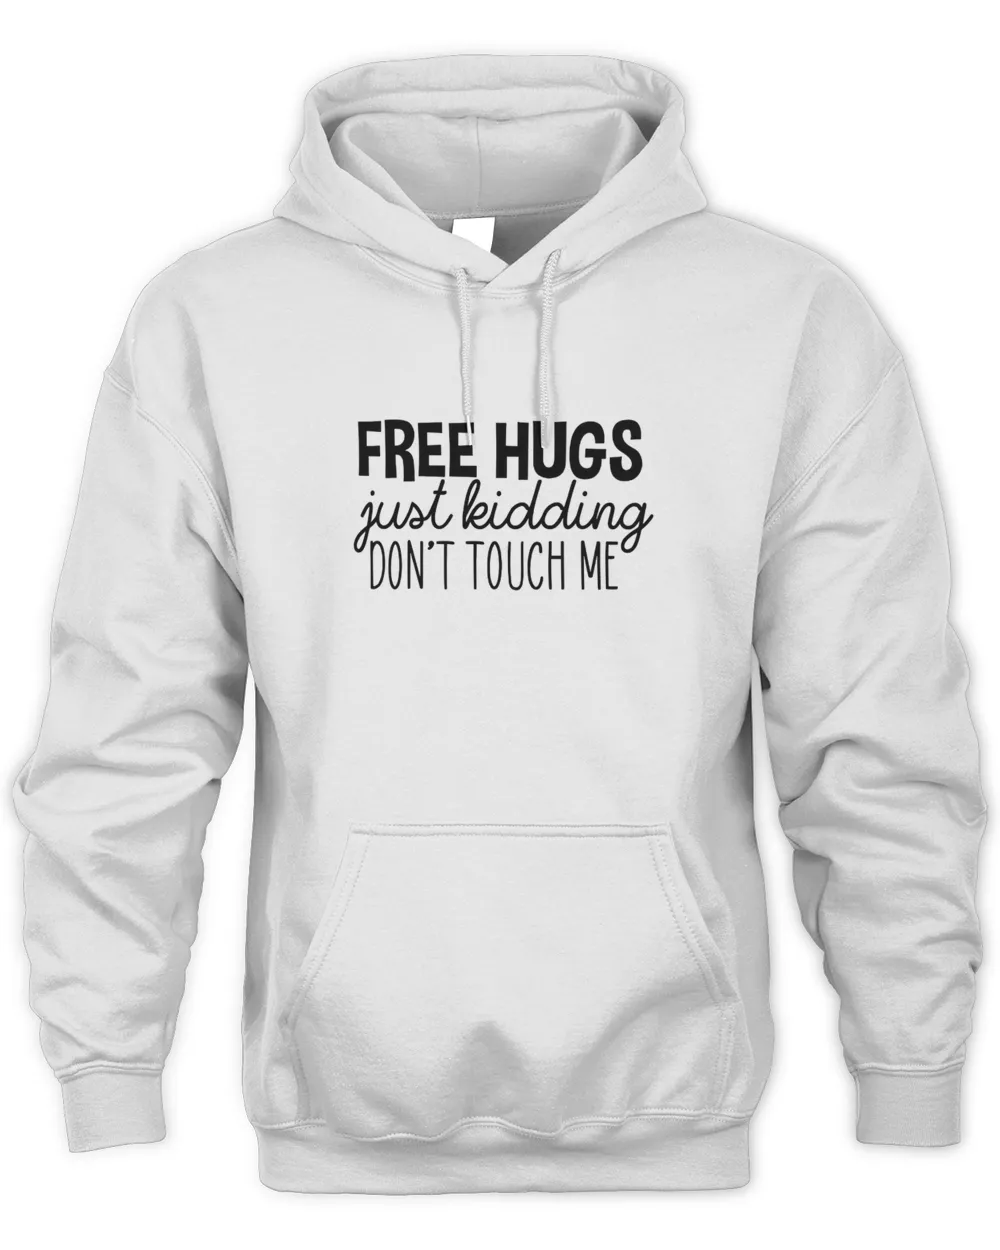 Free Hugs Just Kidding Shirt for Women, Cute Social Distancing T Shirt, Free Hugs Just Kidding Don't Touch Me T-Shirt, Funny Gift For Her